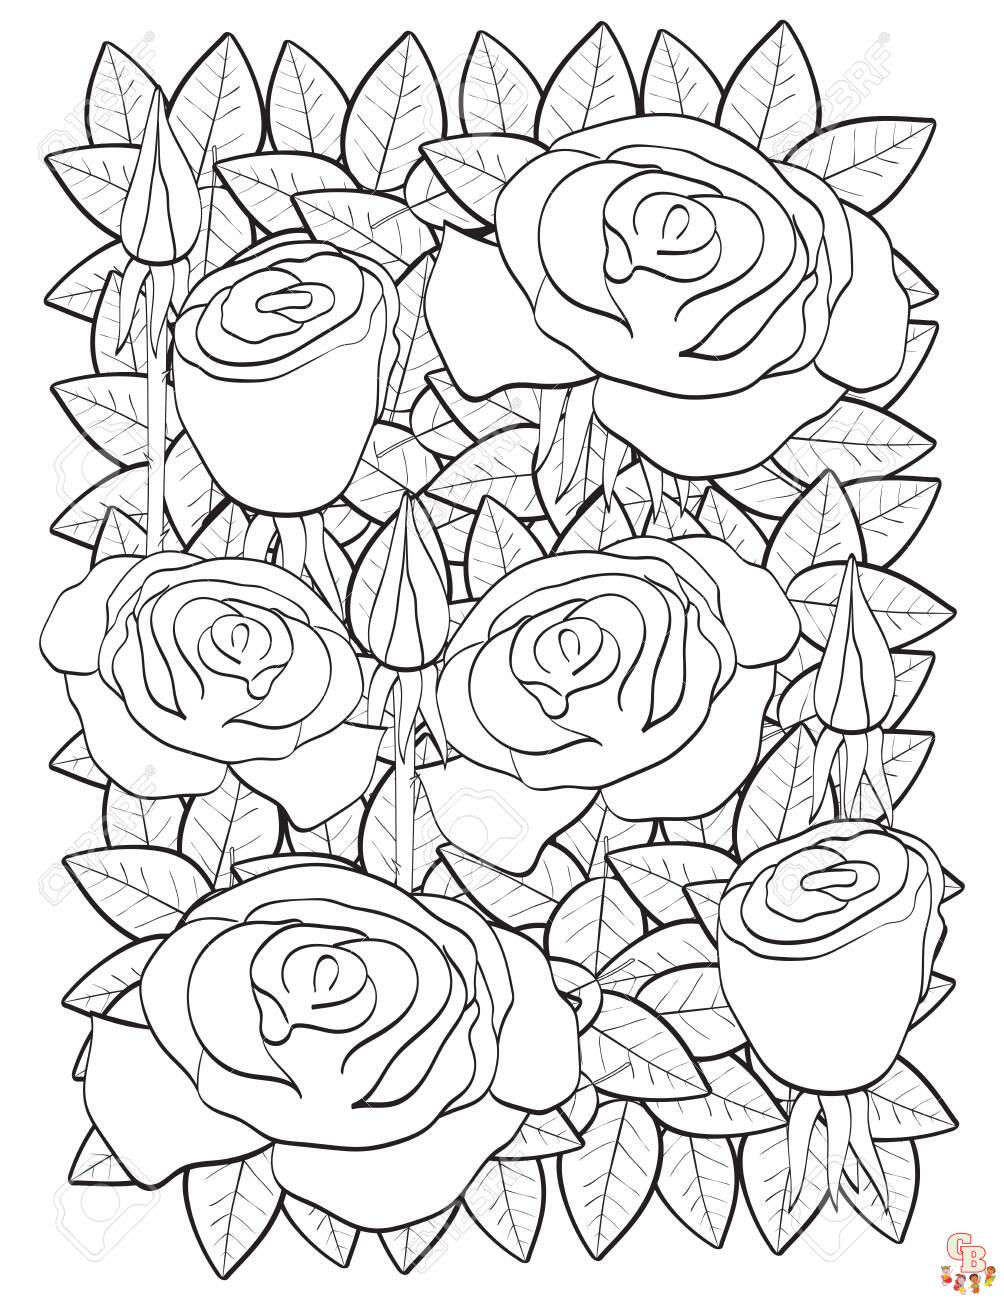 149895501 roses coloring page vector illustration